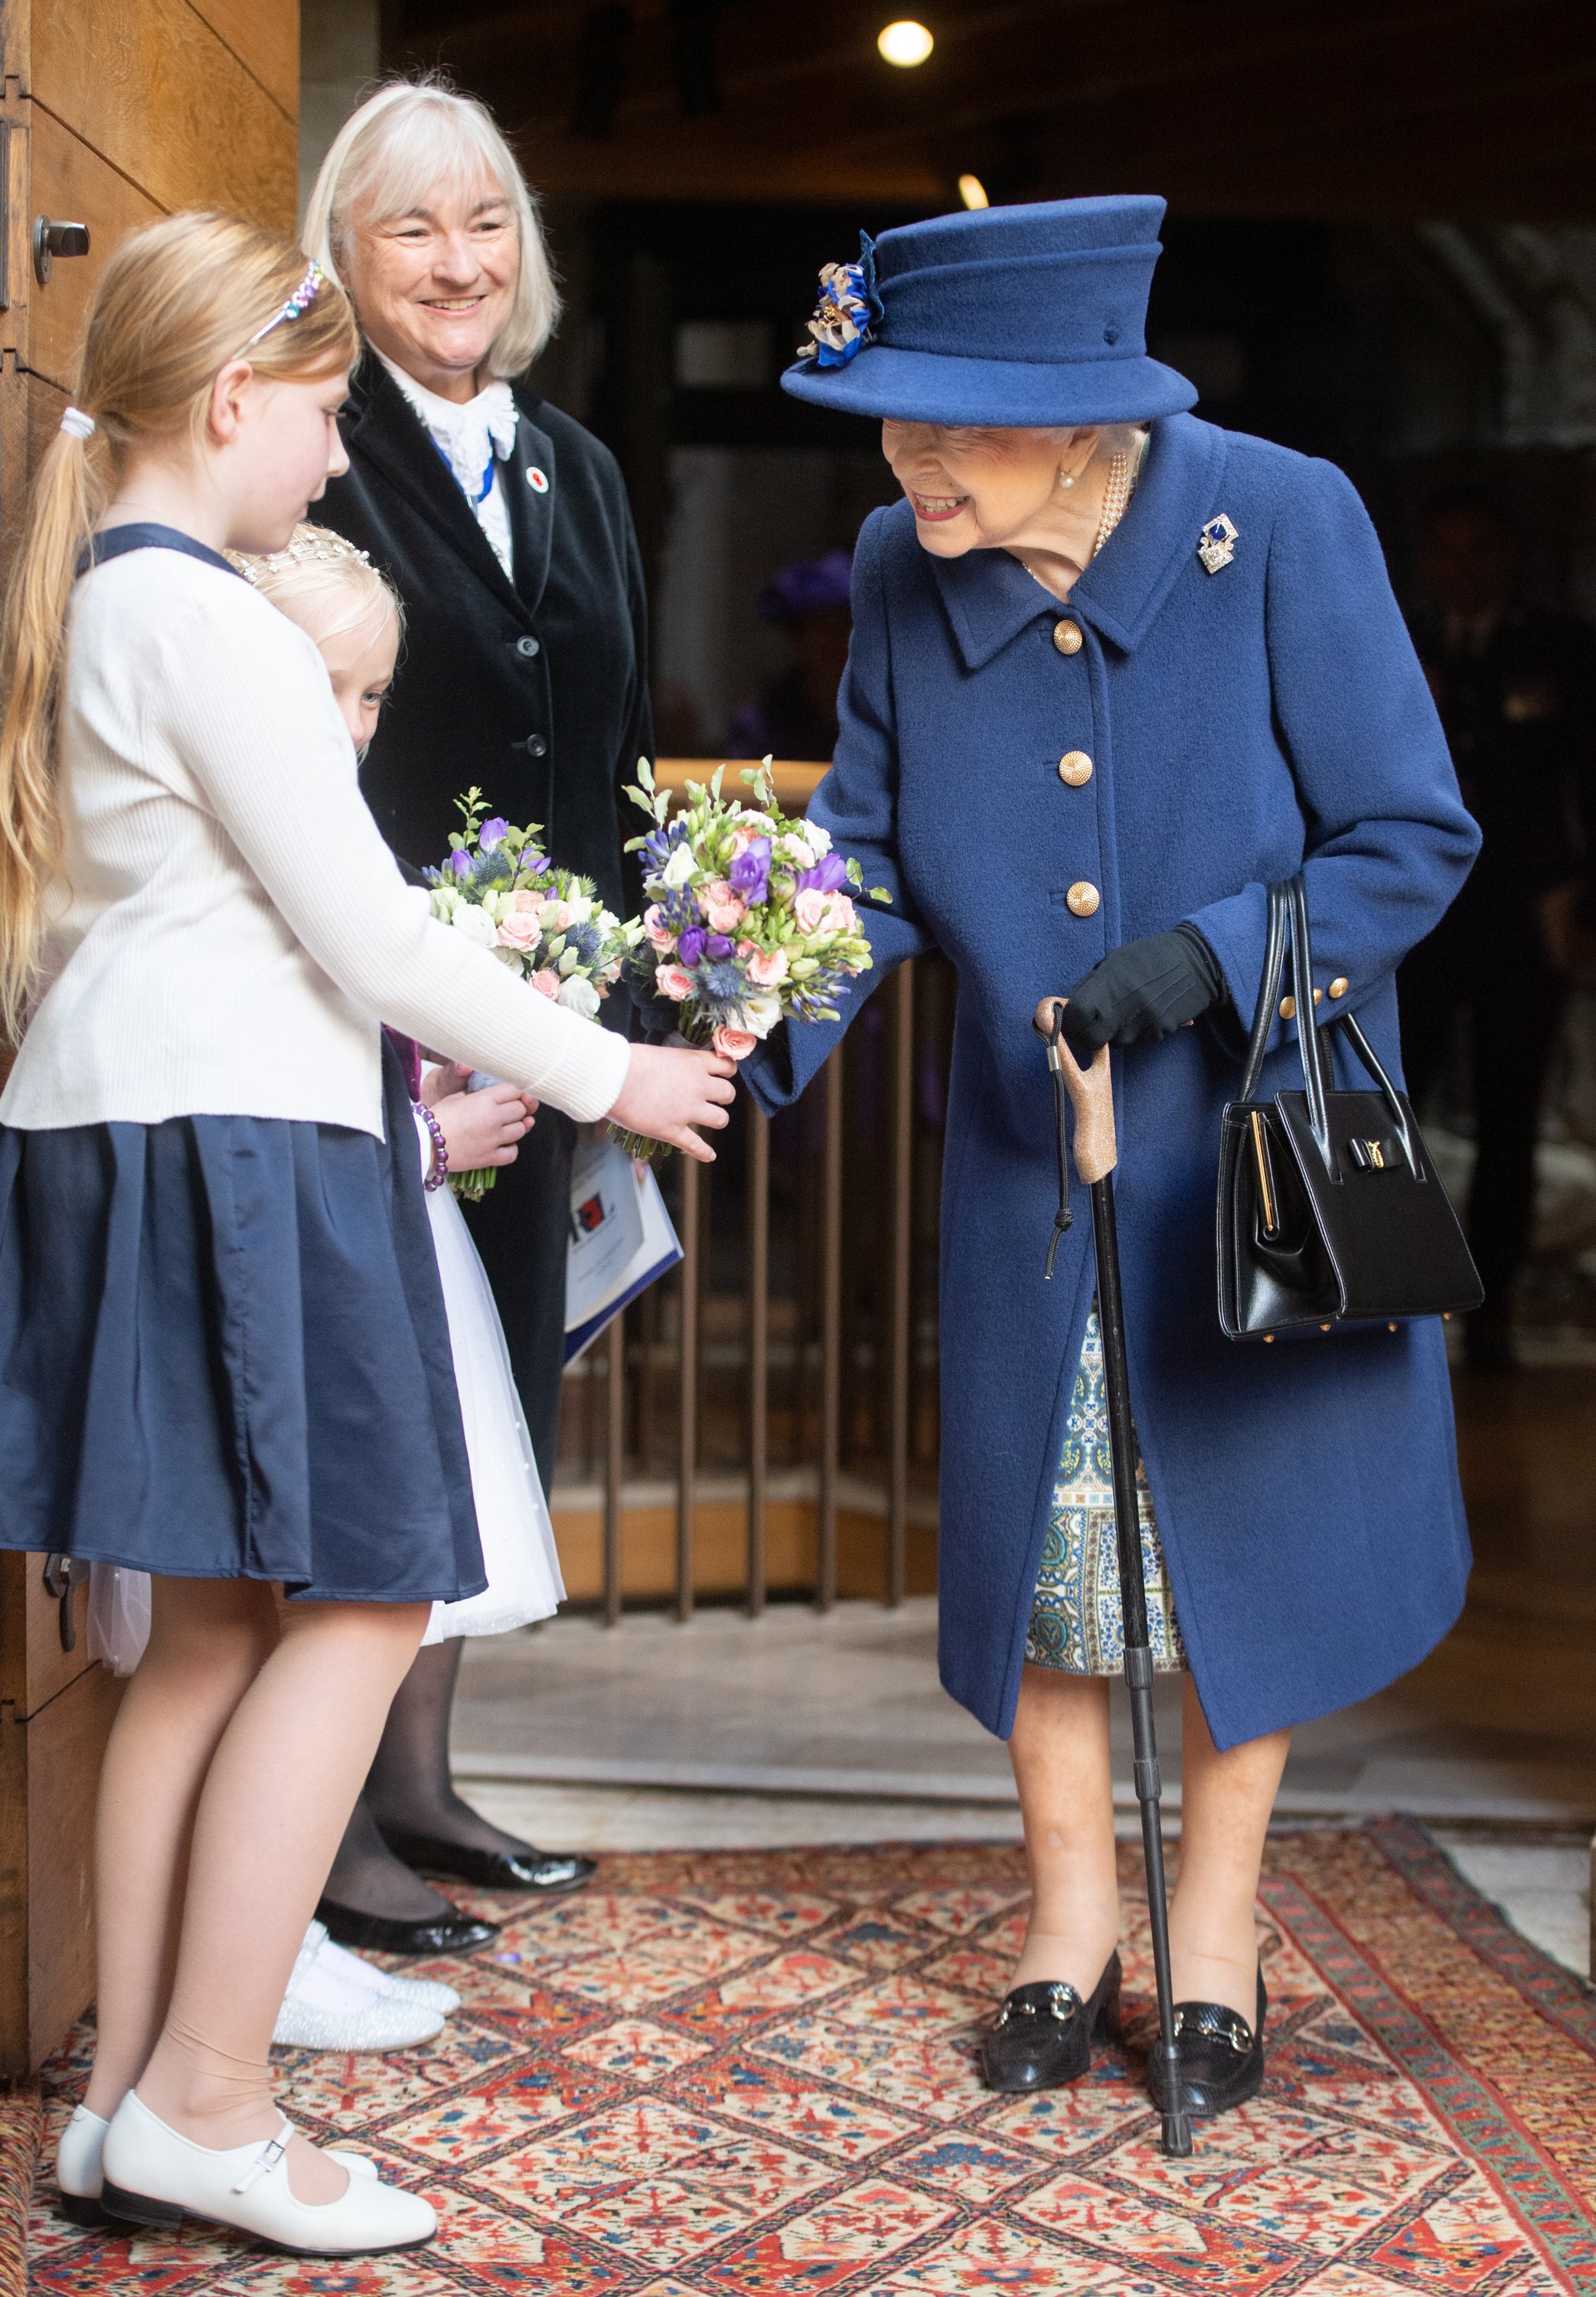 Queen Elizabeth II at a Service of Thanksgiving to mark the centenary of The Royal British Legion at Westminster Abbey on October 12, 2021, in London, England. | Source: Getty Images